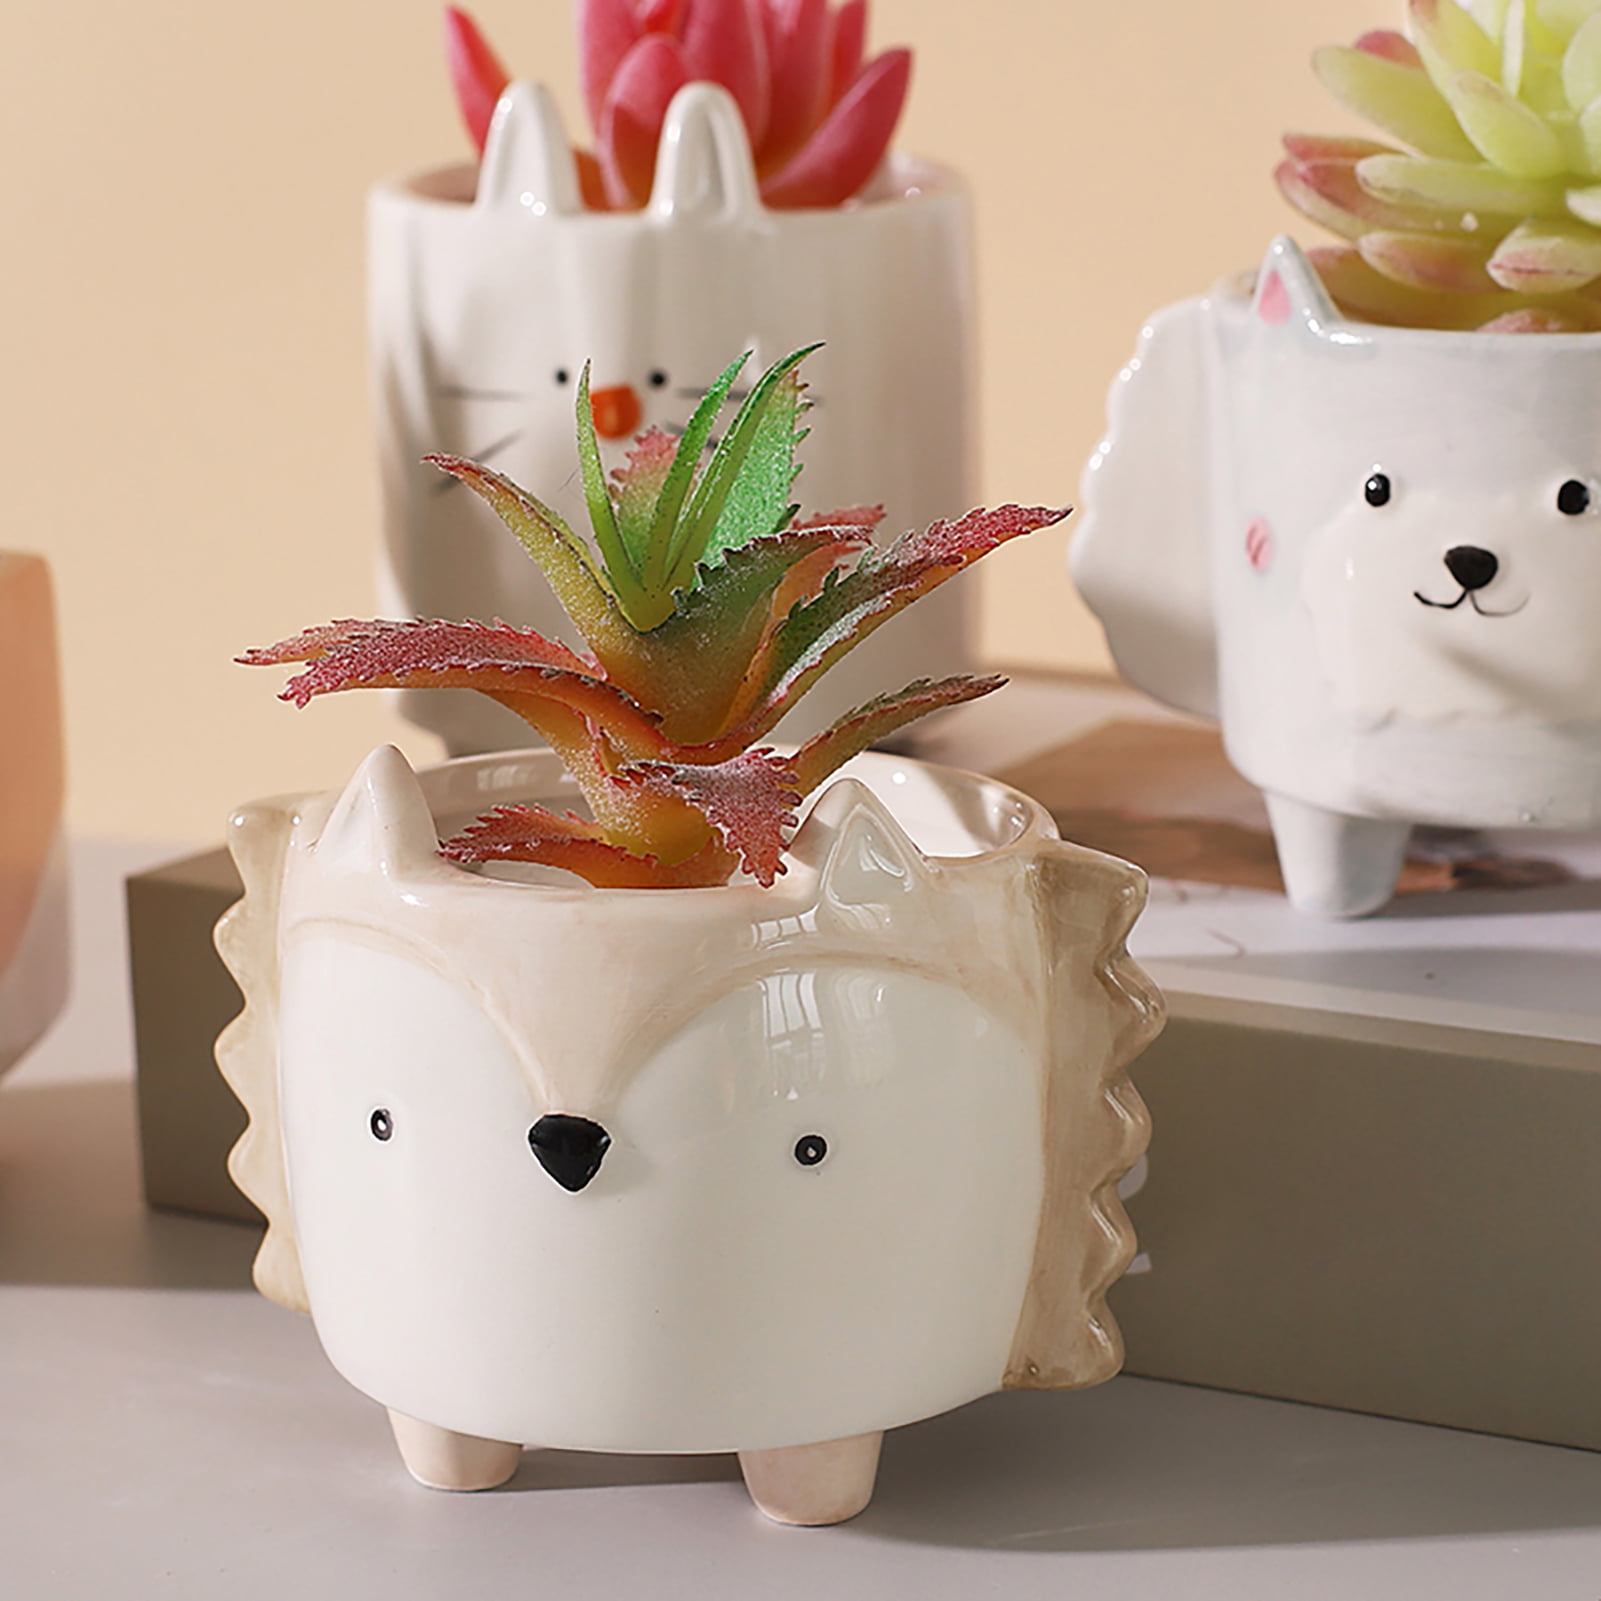 3.25 Inch Cactus Pots with Drainage Hole Cute Gift Owl Fox Hedgehog DIY Paint Your Own Animal Ceramic Succulent Planters Set of 3 DIY Set of 3 Backyard Animals